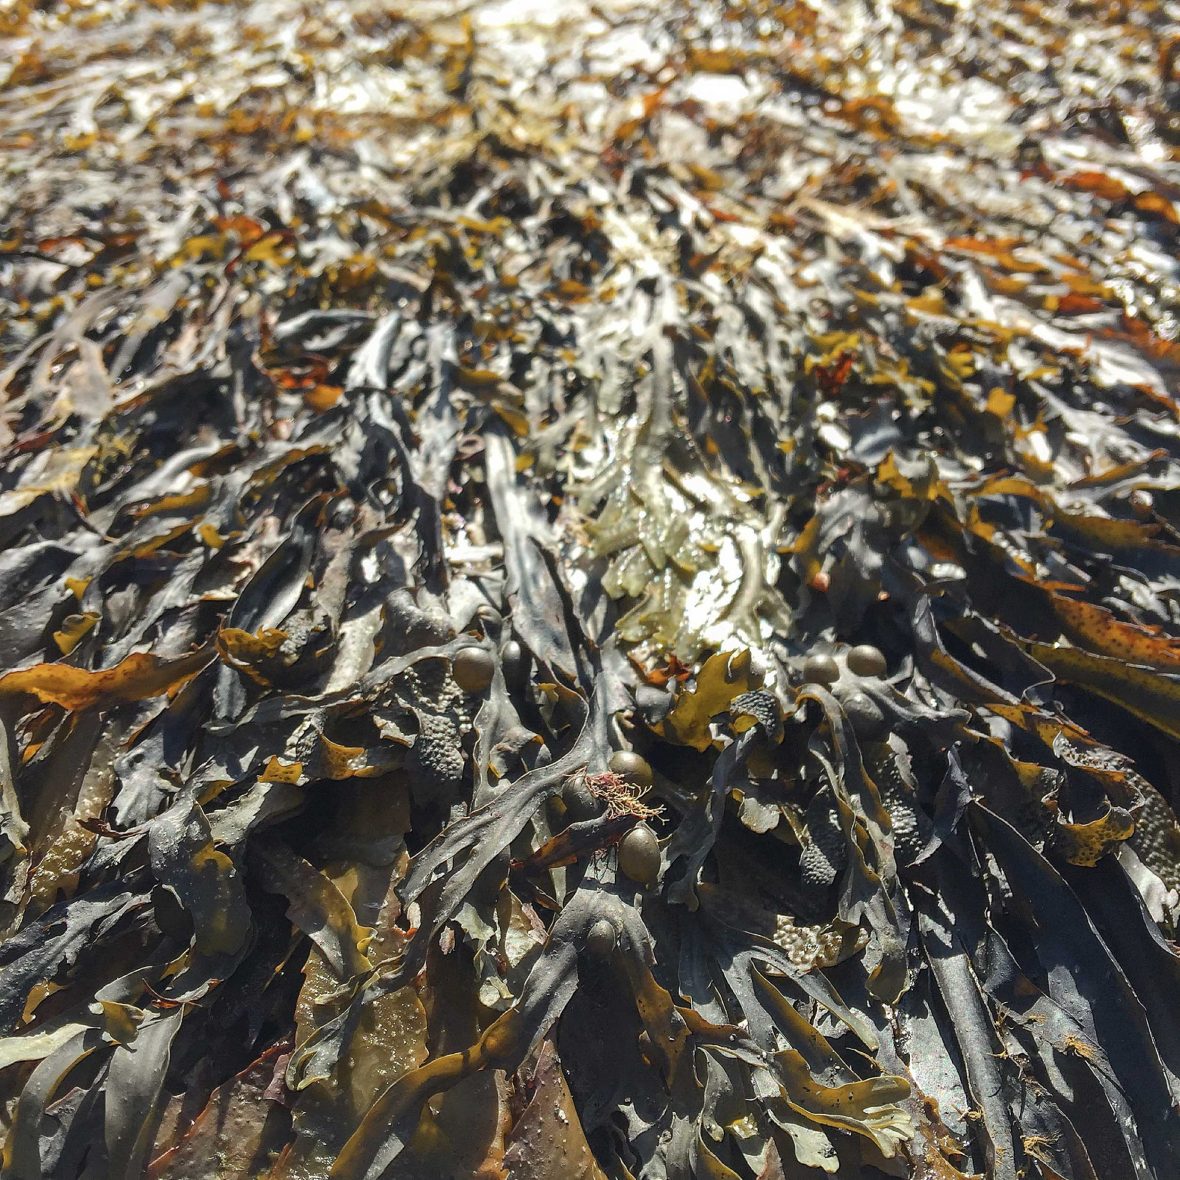 Seaweed could help draw down carbon from the atmosphere.